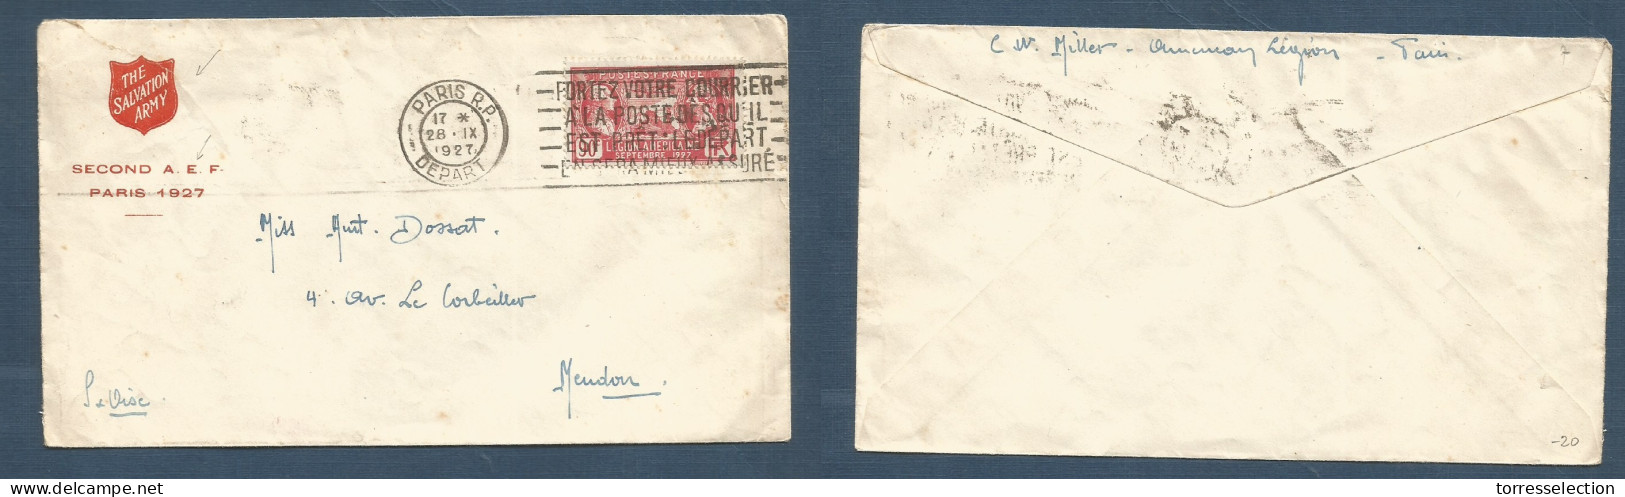 MILITARY MAIL. 1927 (28 Sept) USA, American Forces- Second AEF. Salvation Army Fkd Envelope. America Legion. Local Fkd U - Correo Militar (PM)